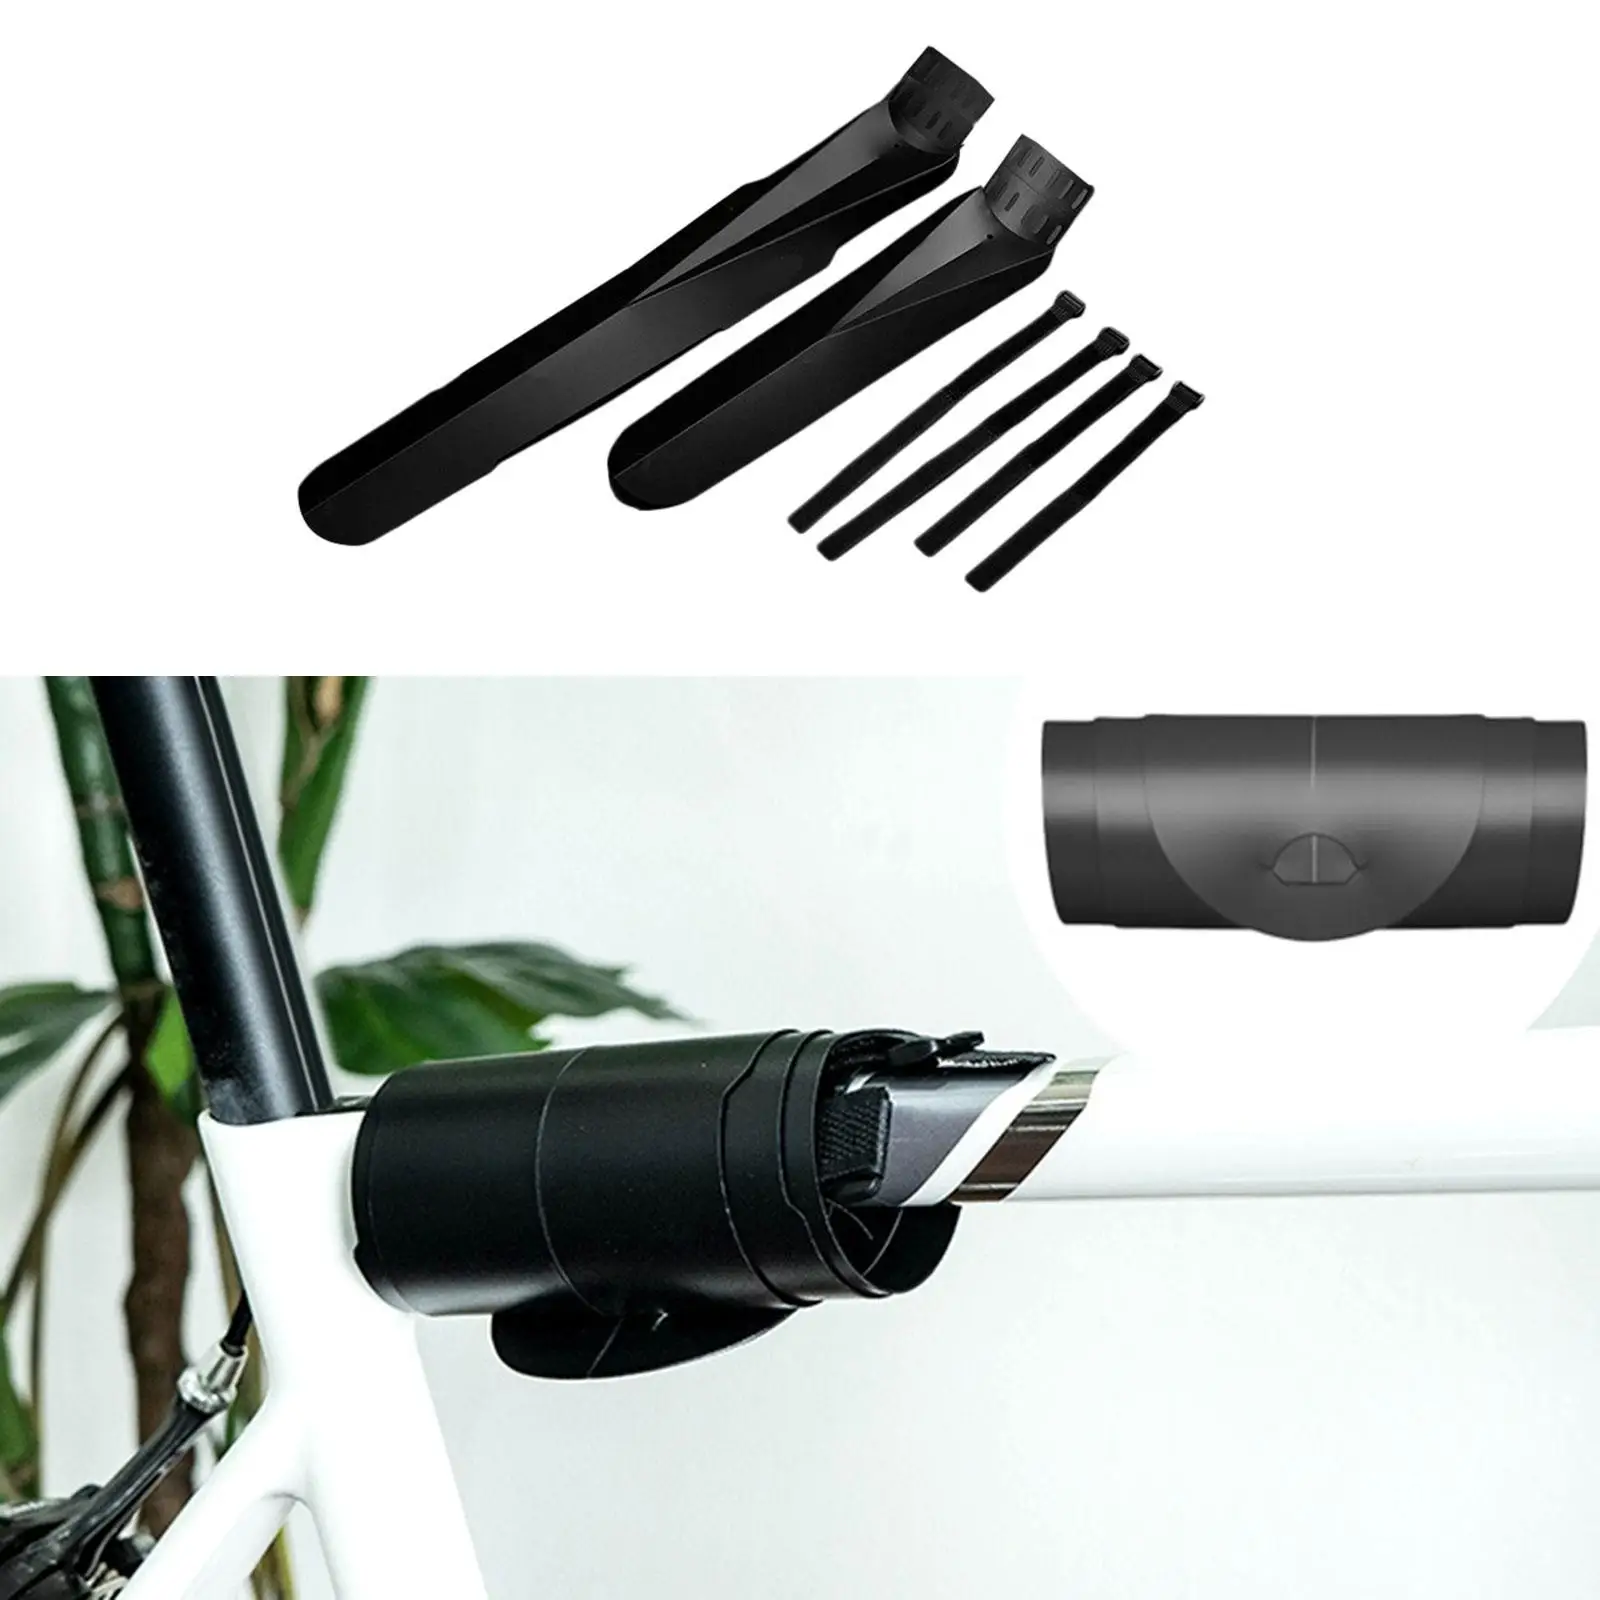 Bike Mudguard Collapsible Accessories DIY Front Rear Set for Mountain Bike